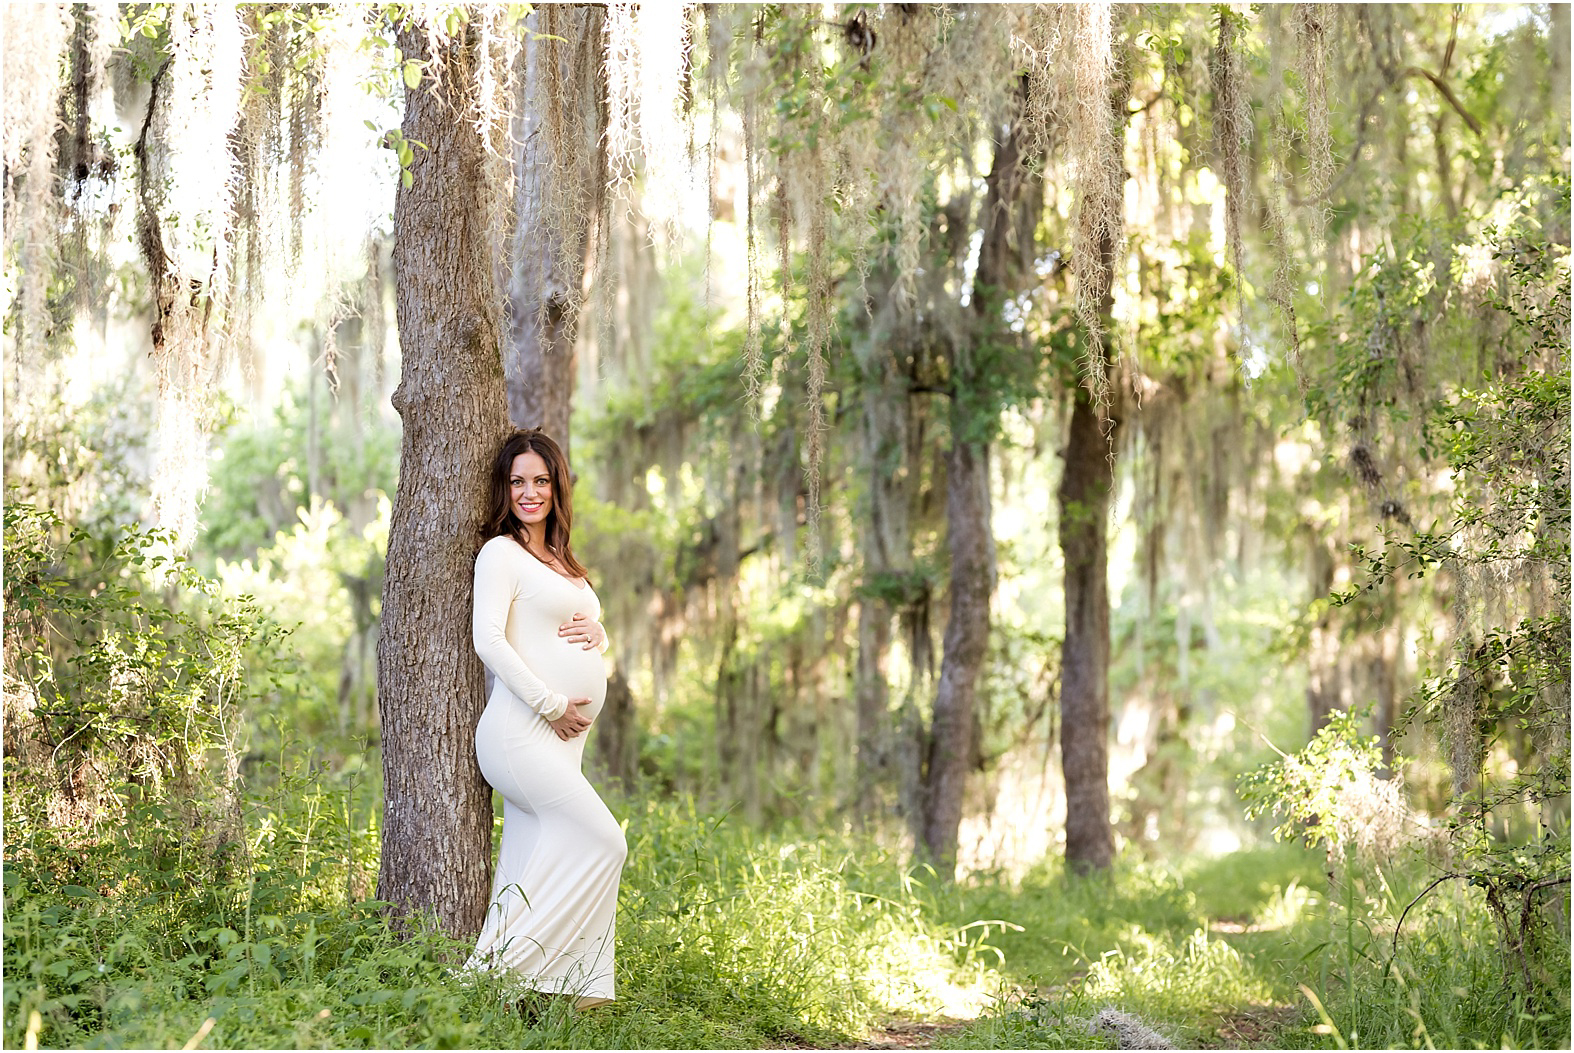 Houston Outdoor Maternity Session Featuring Mossy Trees and Texas  Bluebonnets, Houston, TX Maternity Photographer — Dear Marlowe Photography